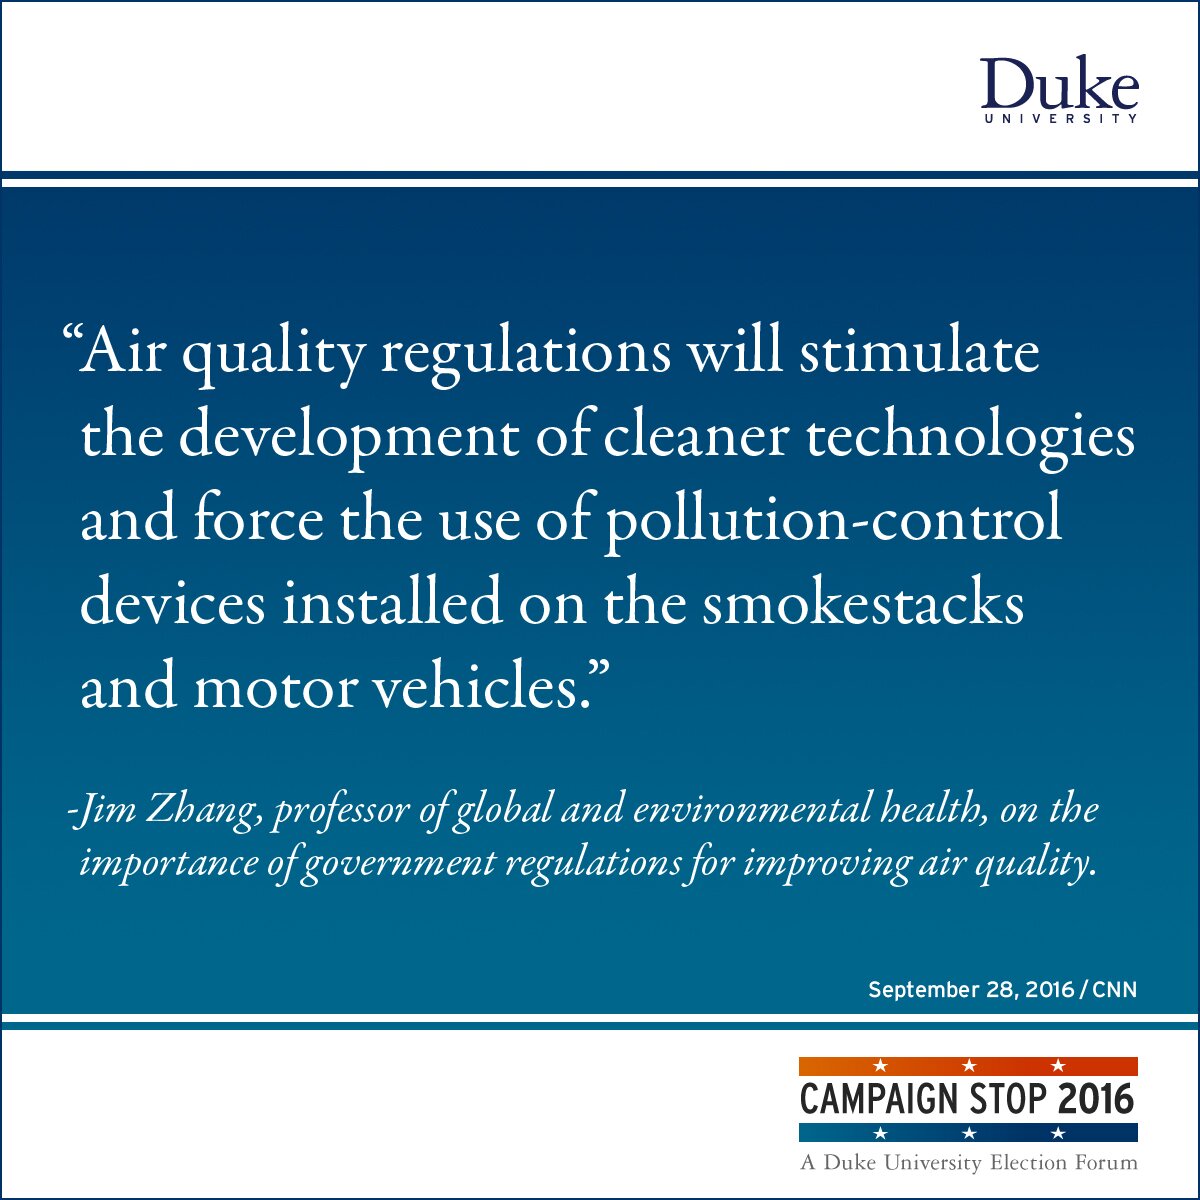 “Air quality regulations will stimulate the development of cleaner technologies and force the use of pollution-control devices installed on the smokestacks and motor vehicles.” -Jim Zhang, professor of global and environmental health, on the importance of government regulations for improving air quality.